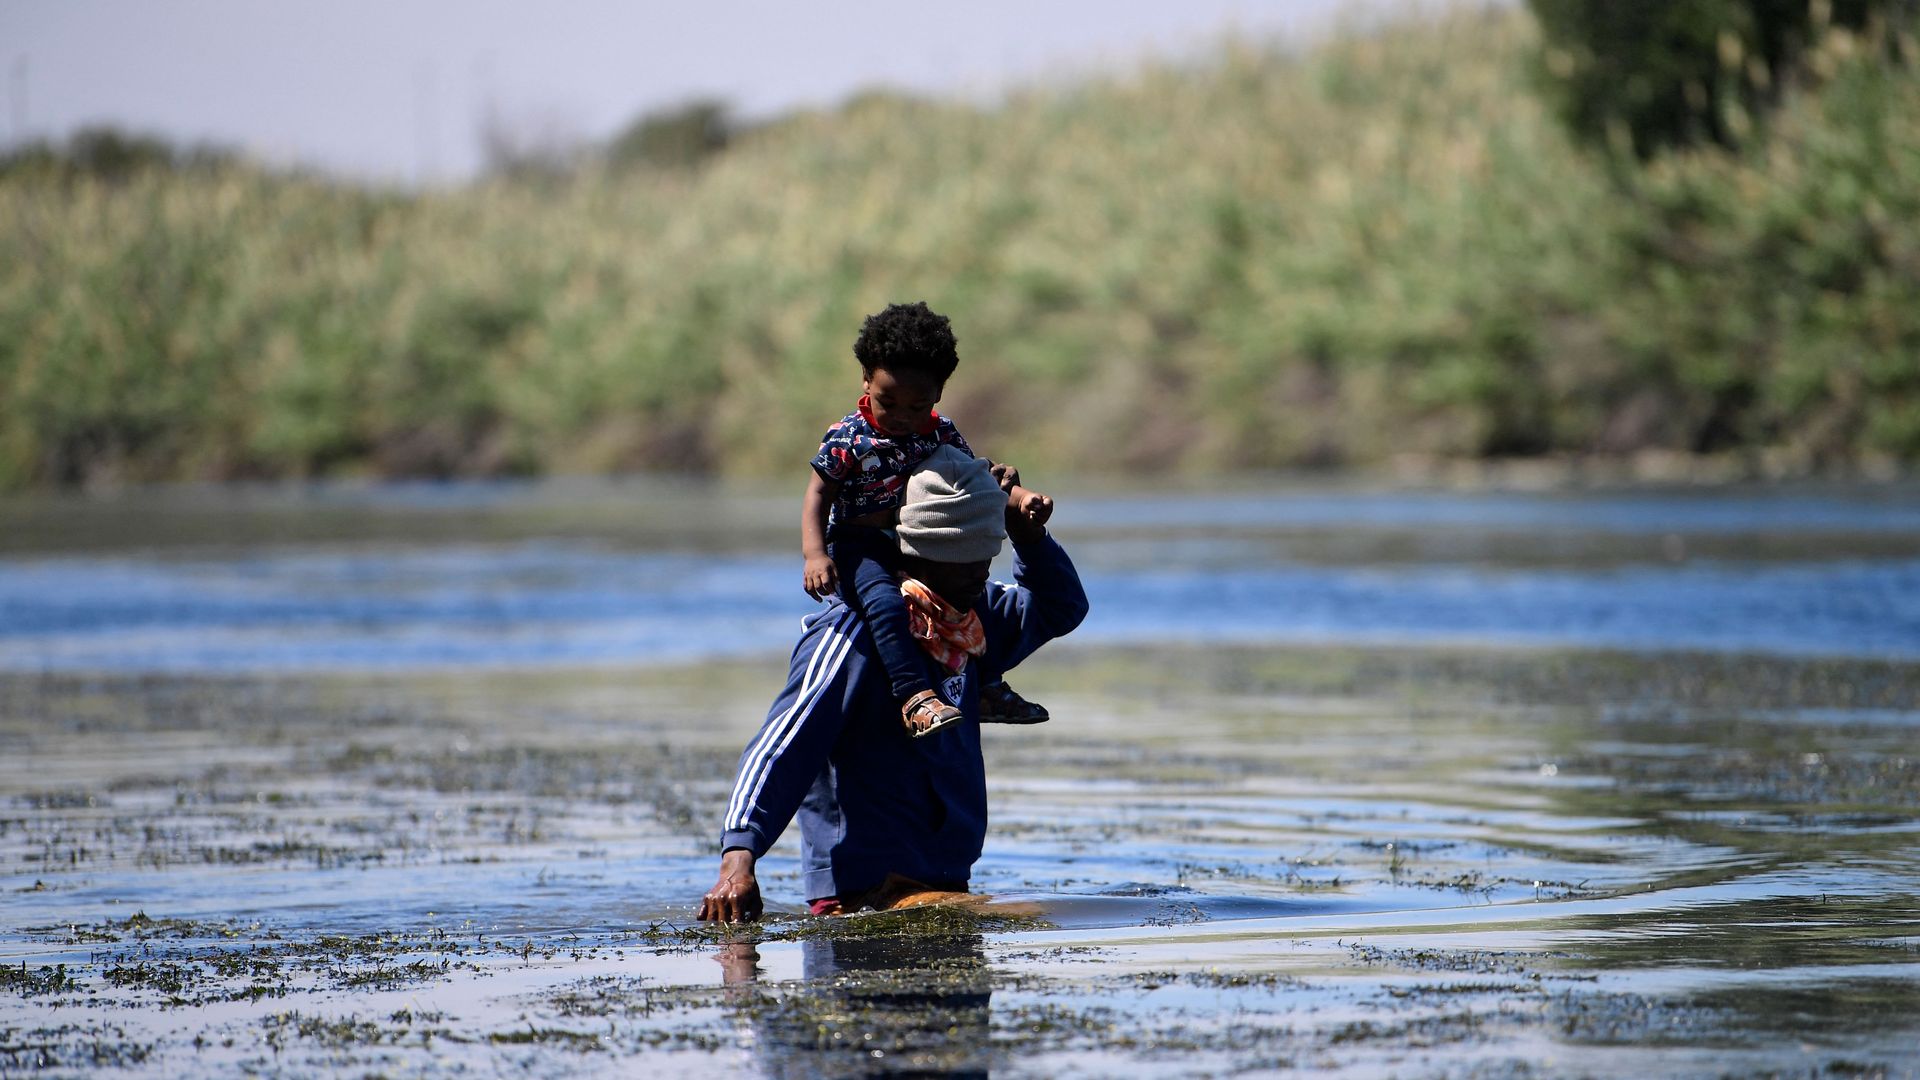 A Haitian migrant is seen carrying a toddler on his shoulders as he crossed the Rio Grande River.